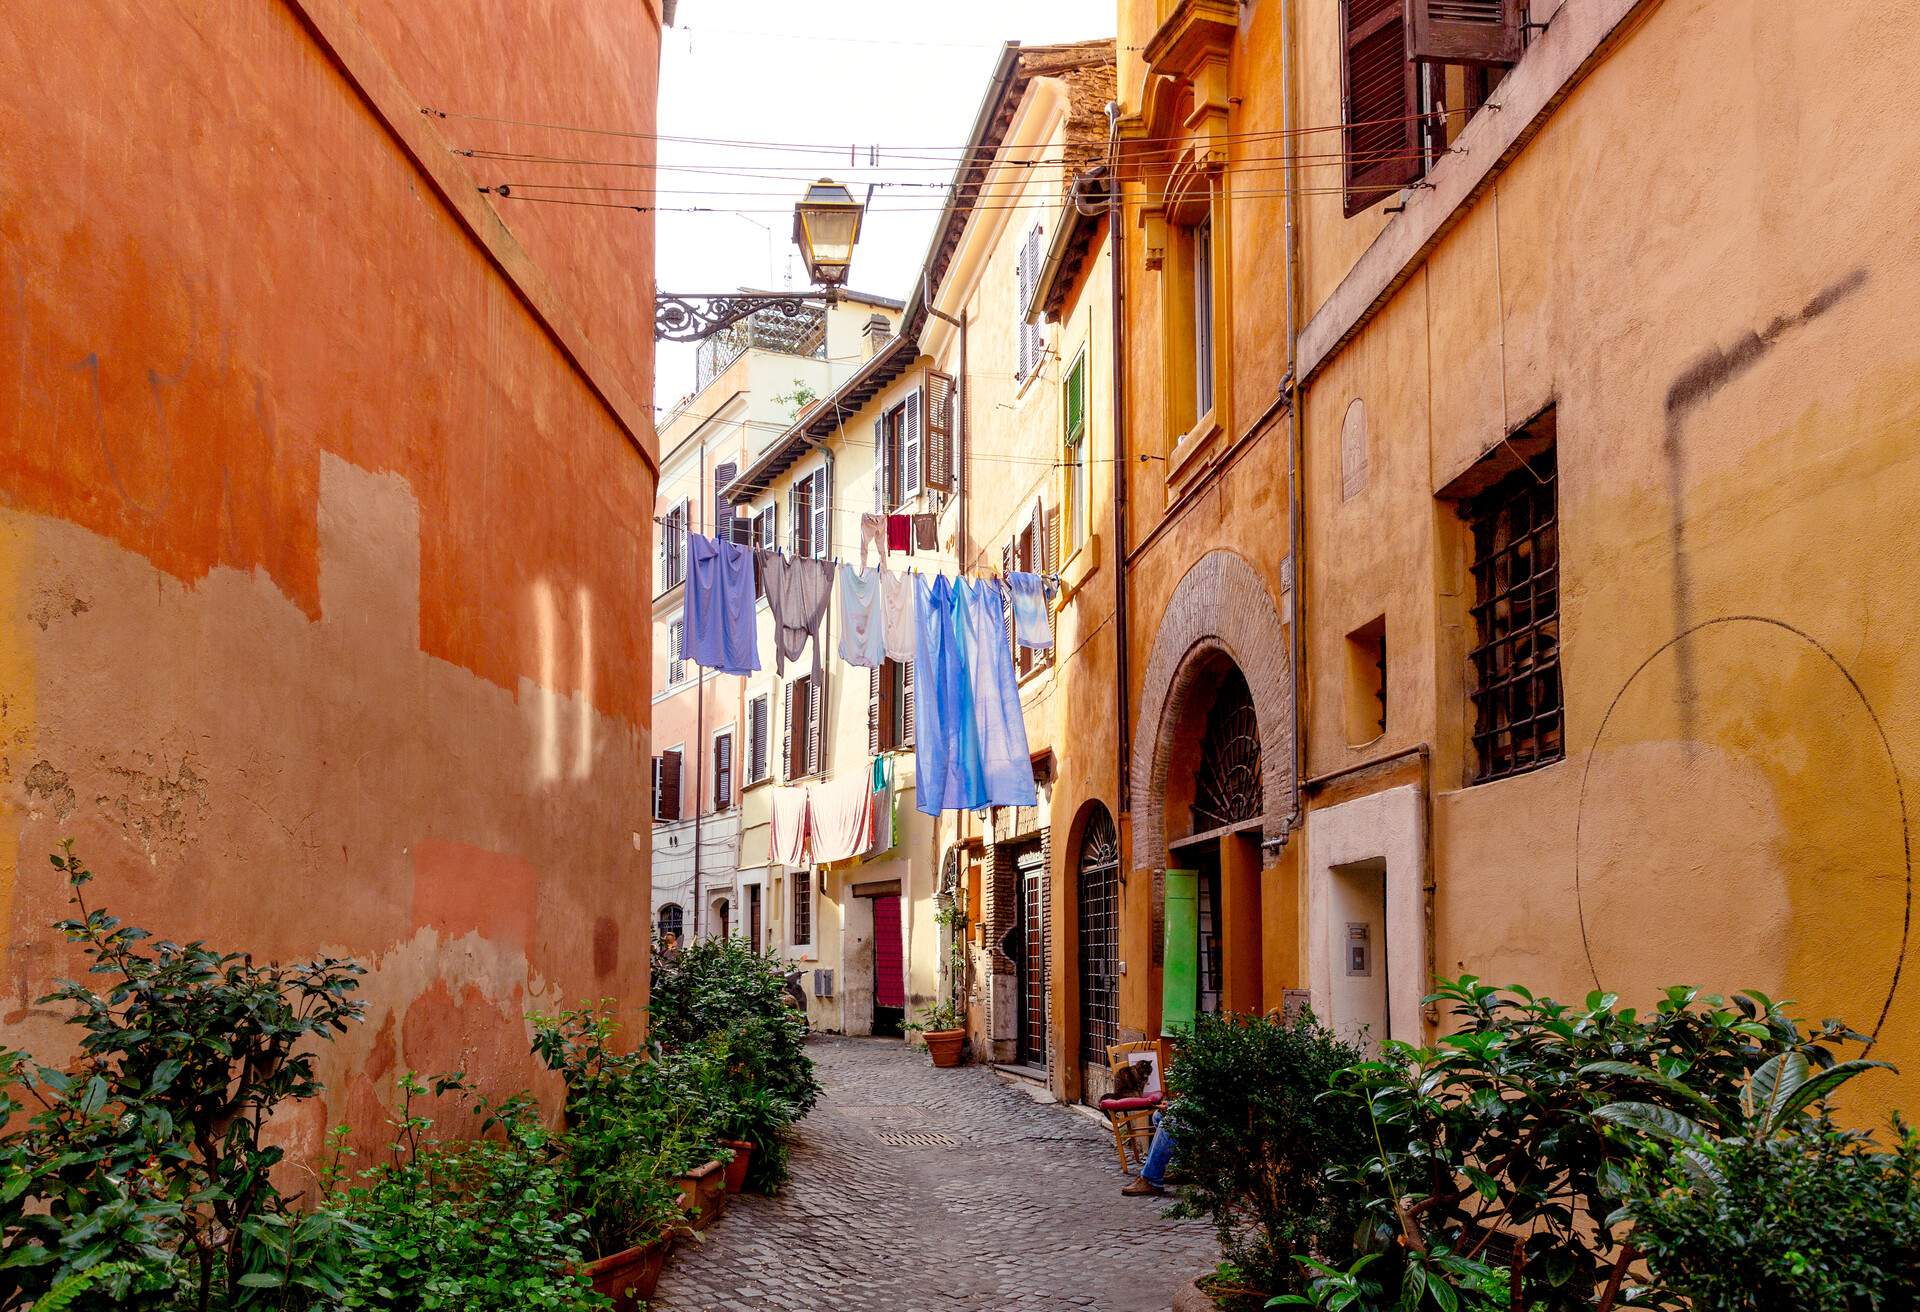 DEST_ITALY_ROME_TRASTEVERE_STREET_GettyImages